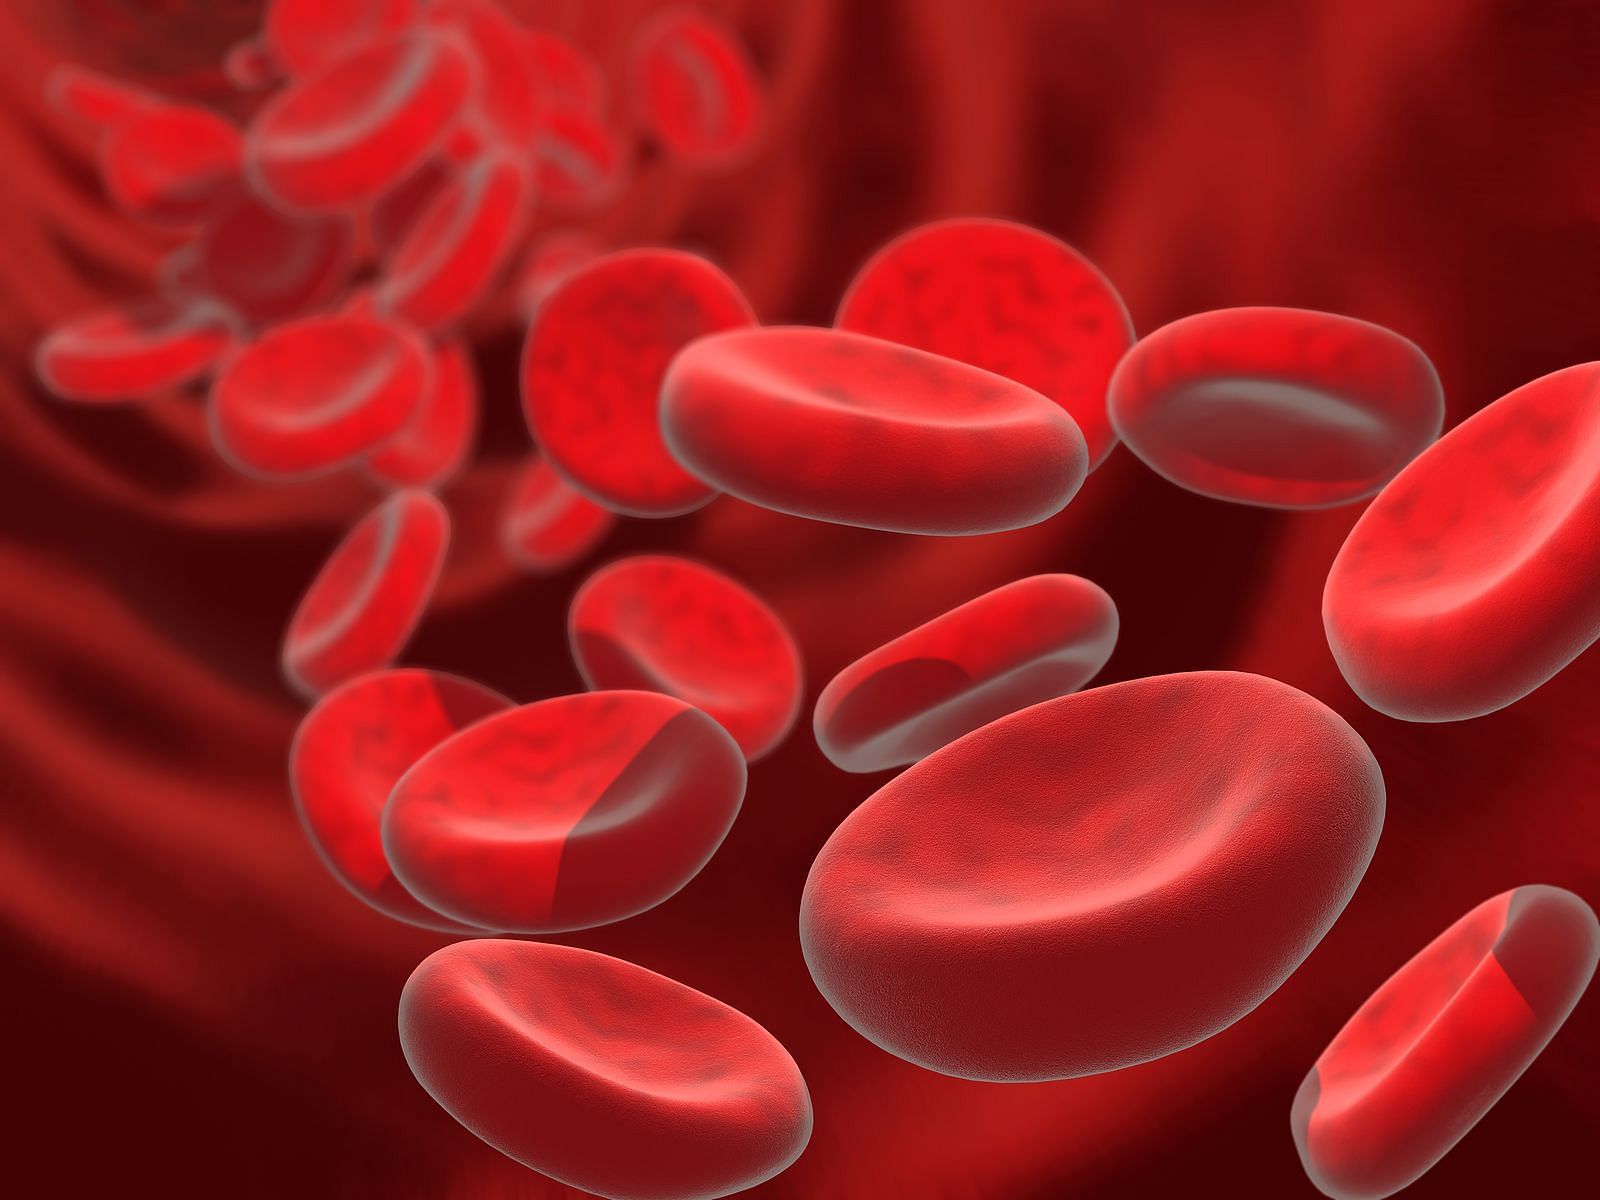 Anemia is a condition in which oxygen-carrying cells are lower than usual. (Image via Flickr)